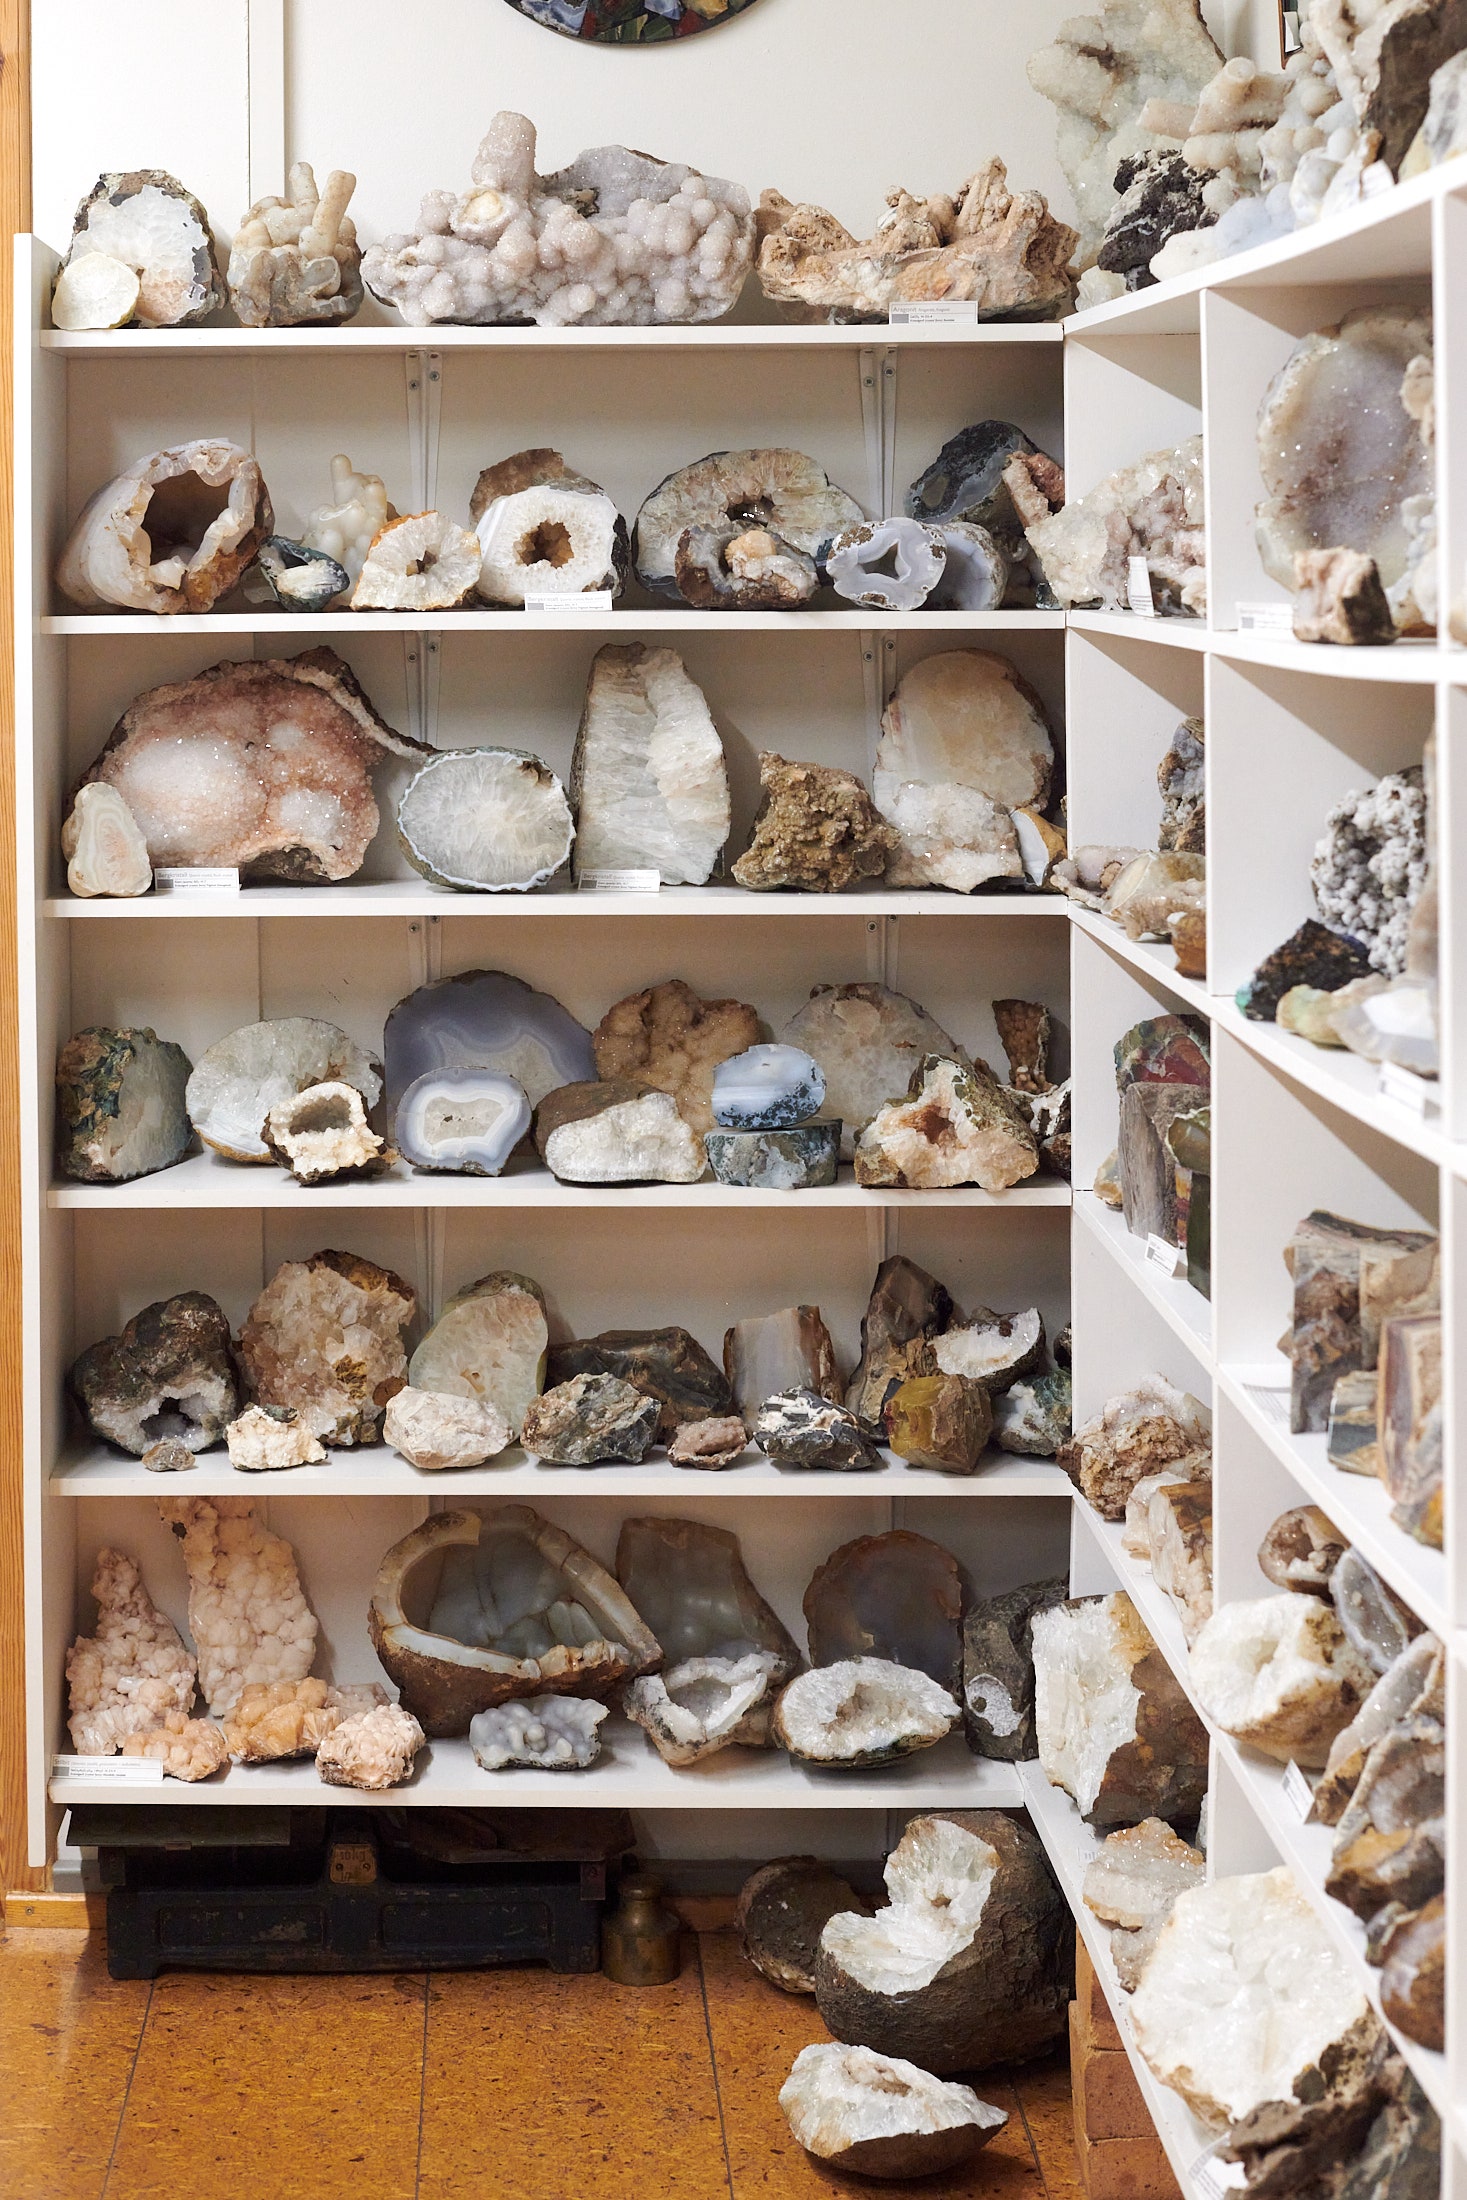 Stones and minerals are organised on shelves inside Petra's Stone and Mineral Museum